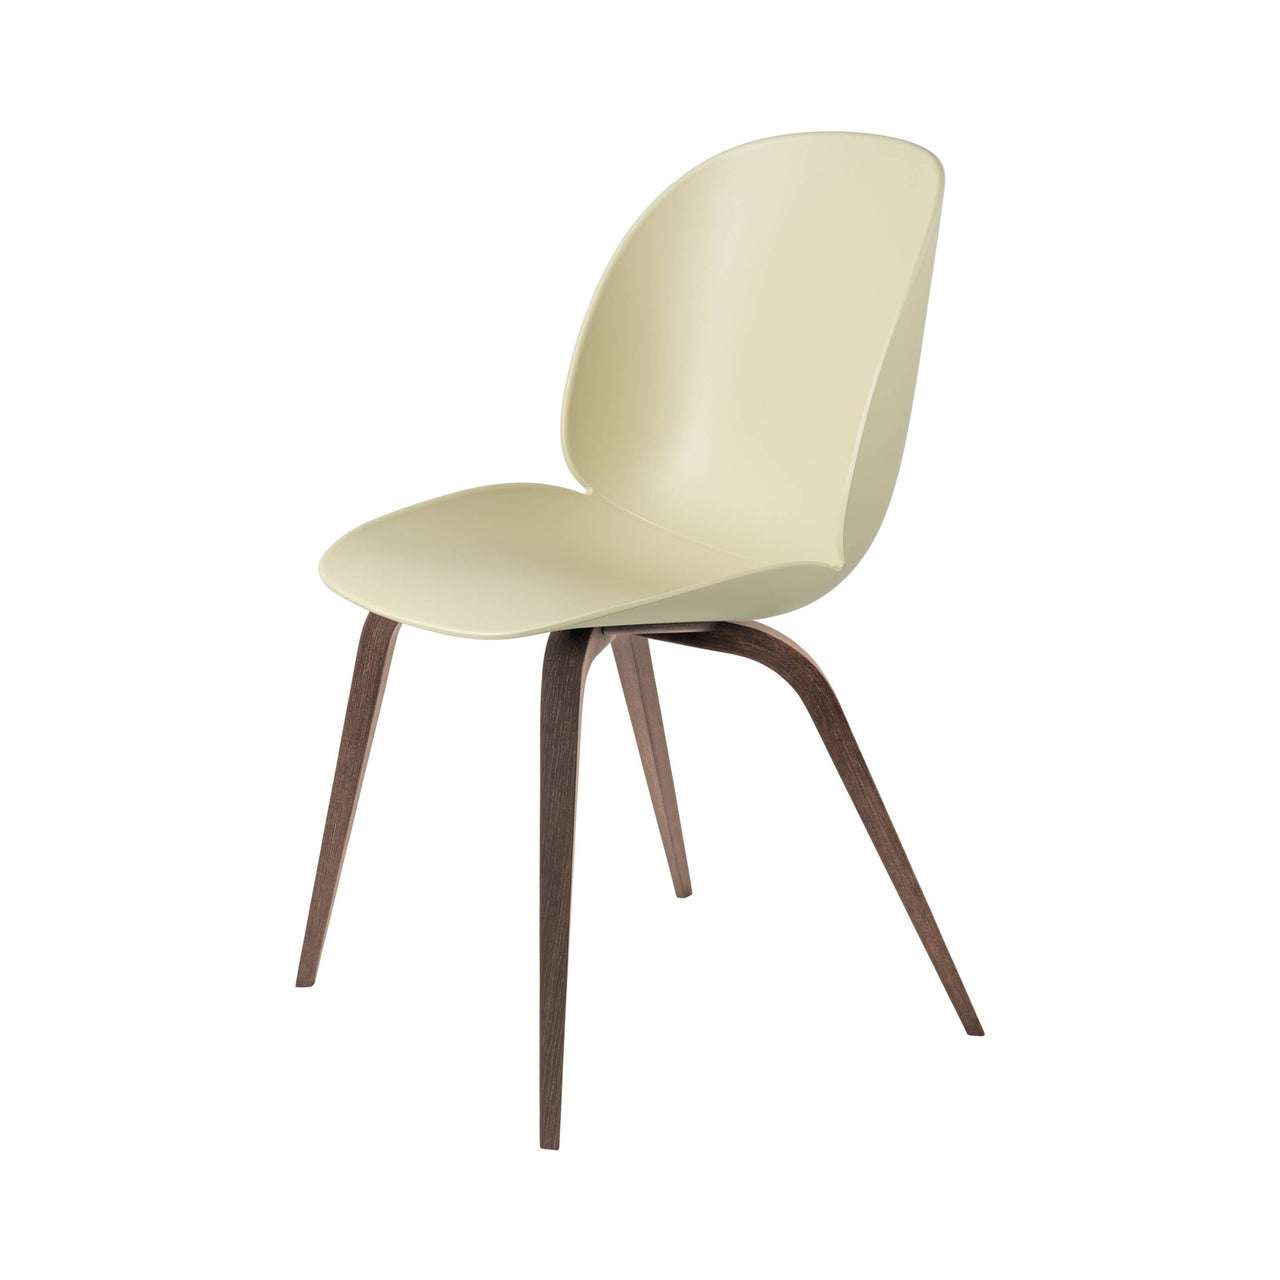 Beetle Dining Chair: Wood Base + Pastel Green + American Walnut + Plastic Glides